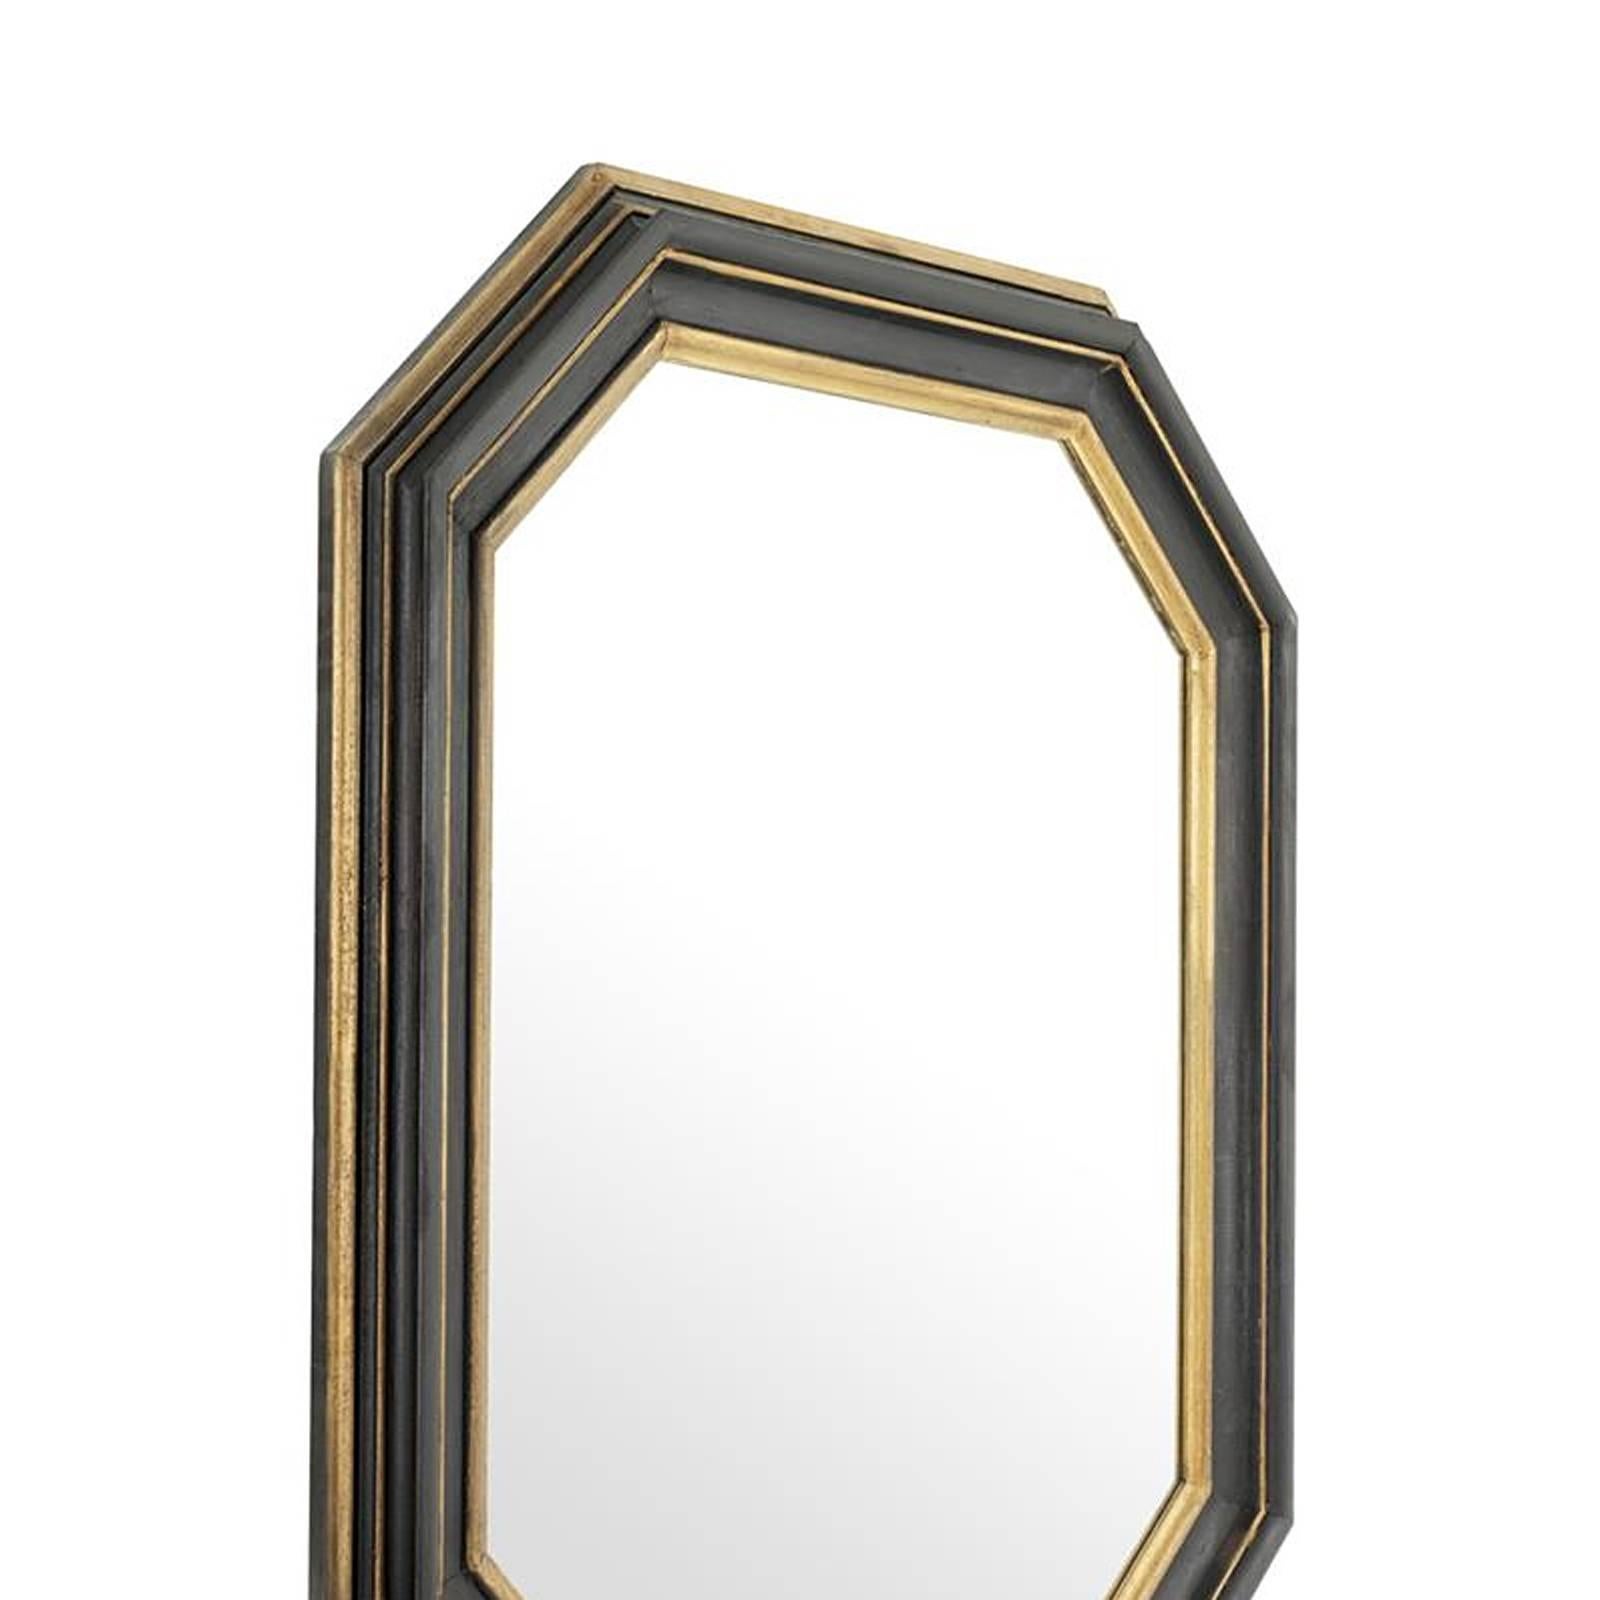 Mirror black vintage in black finish and antique
gold finish. Polownia wood frame and mirror glass.
